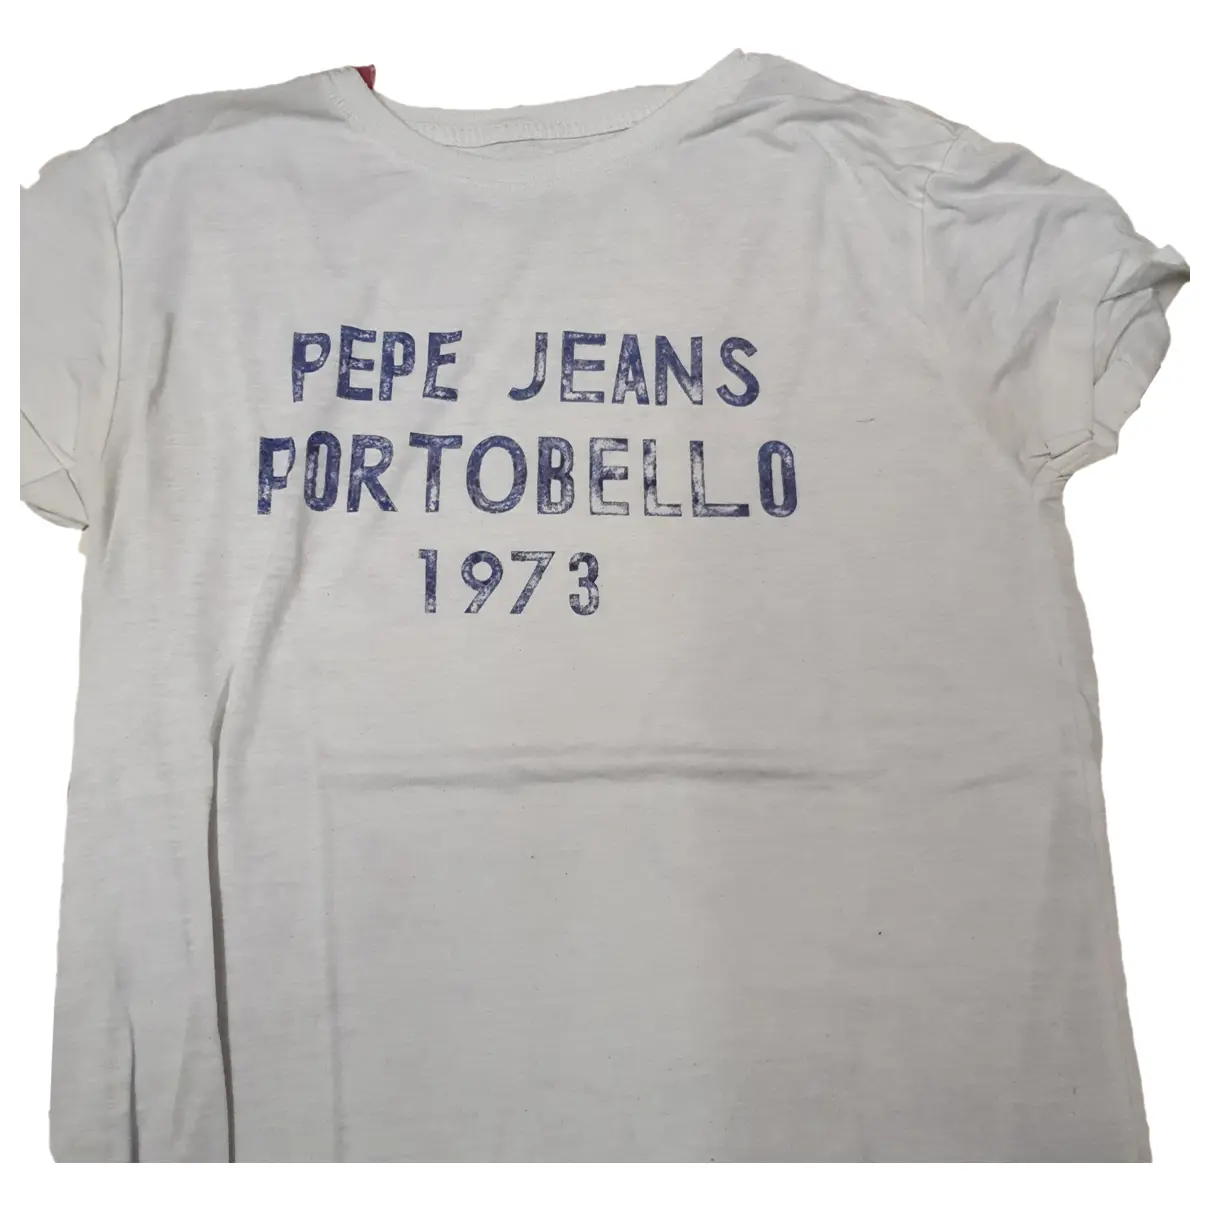 JEANS size T-shirt PEPE in 40 Cotton White FR 38974171 -